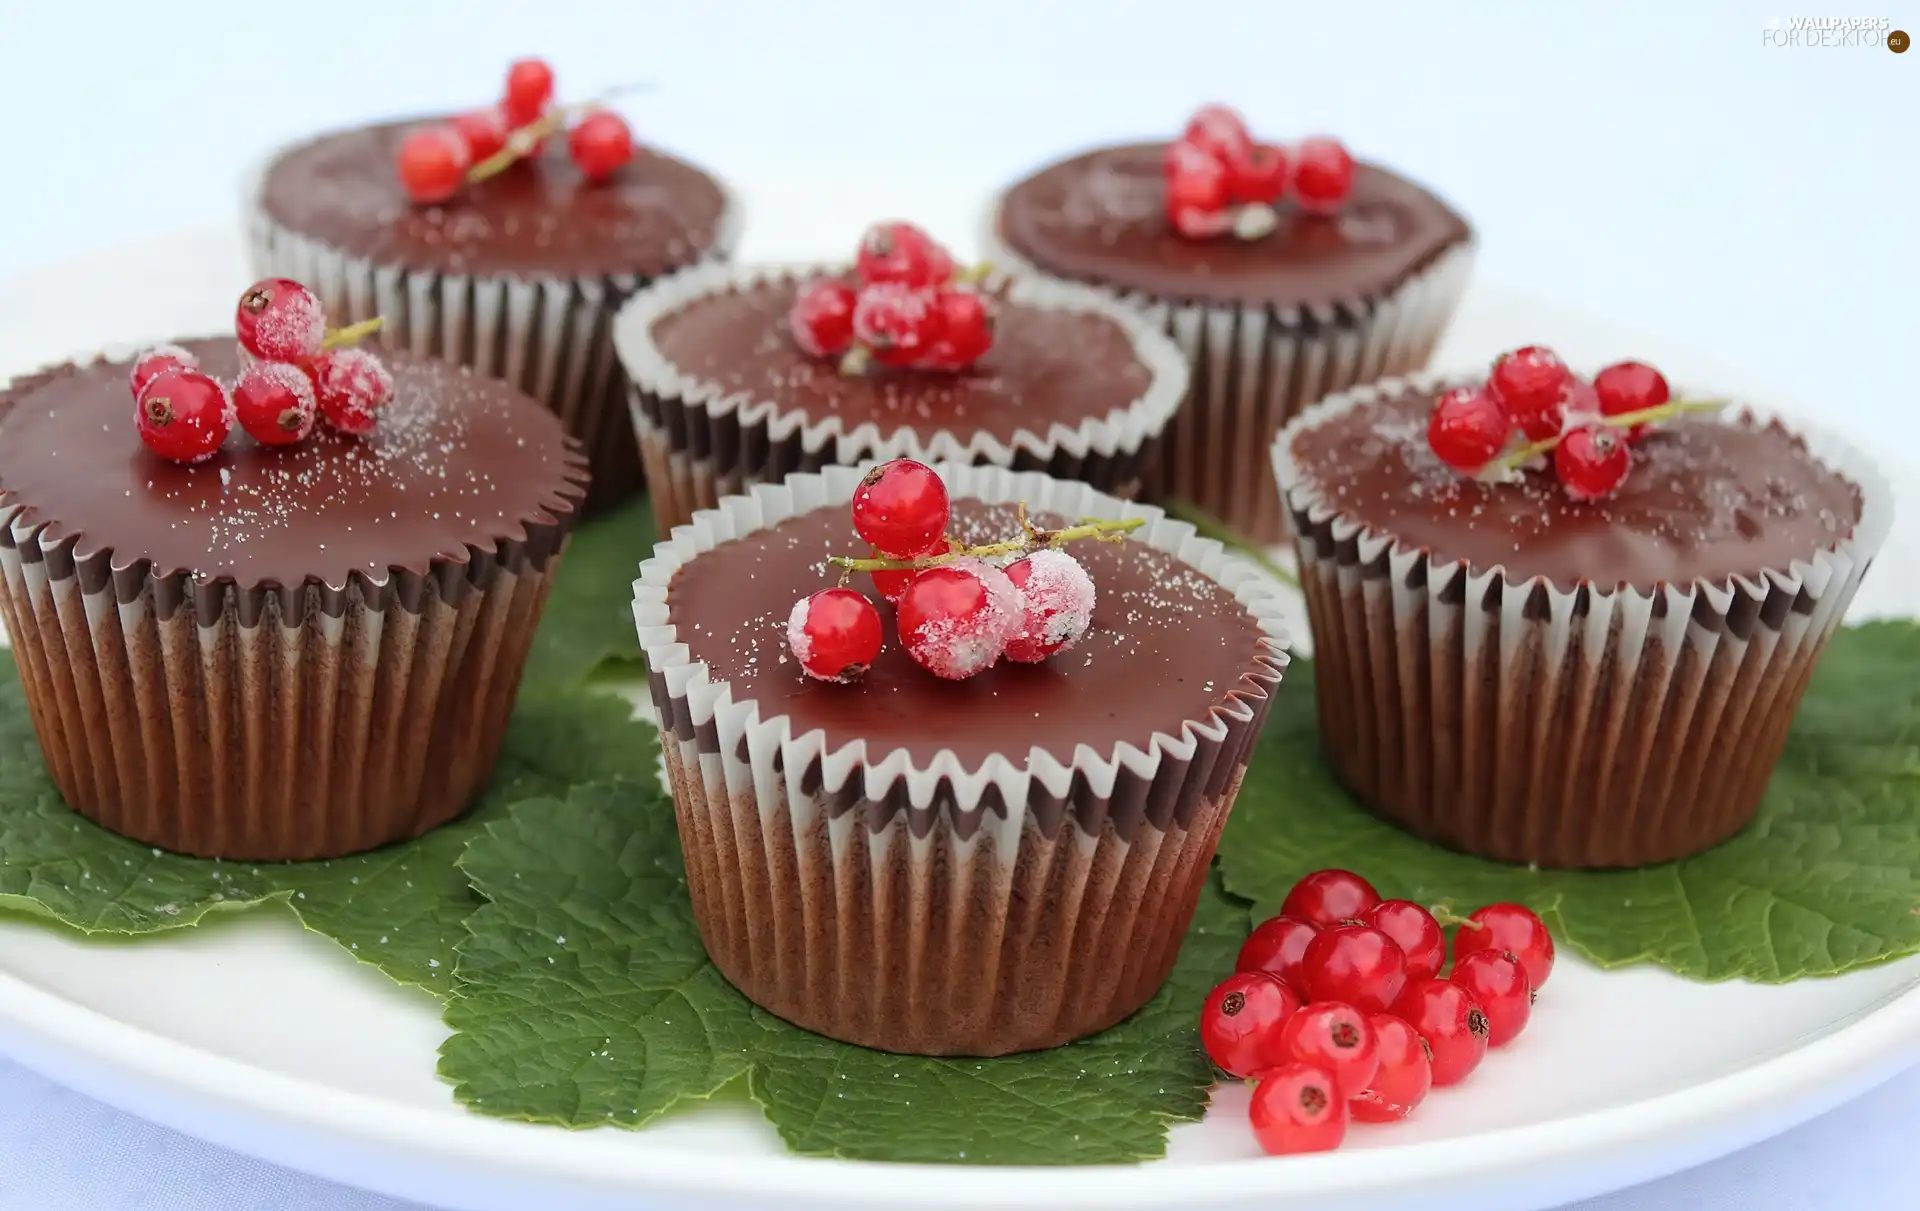 Muffins, currants, leaves, chocolate